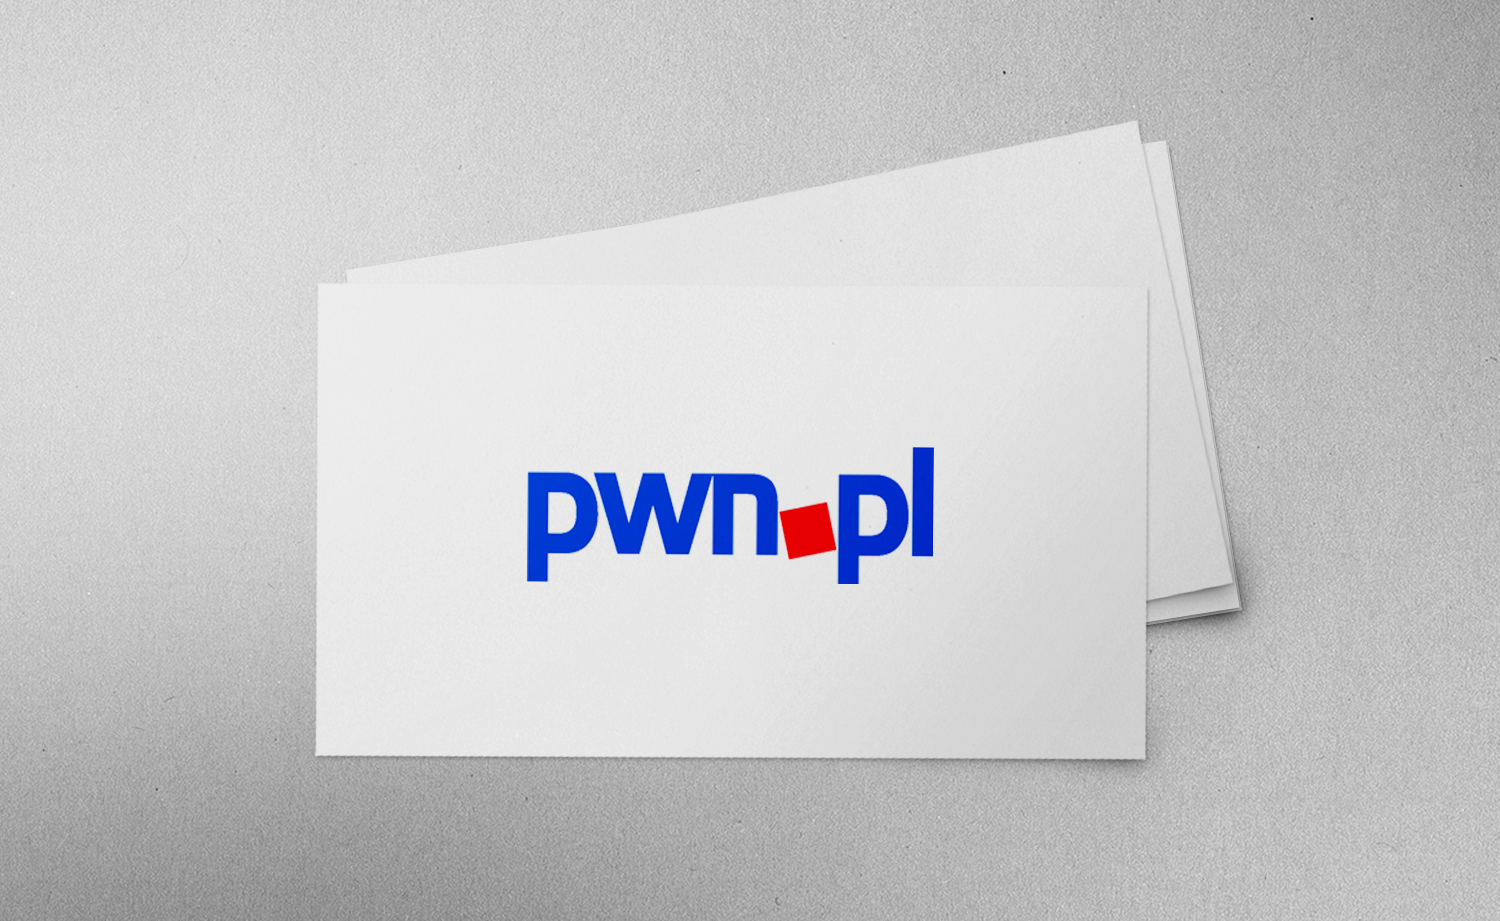 Big e-learning project for PWN.pl